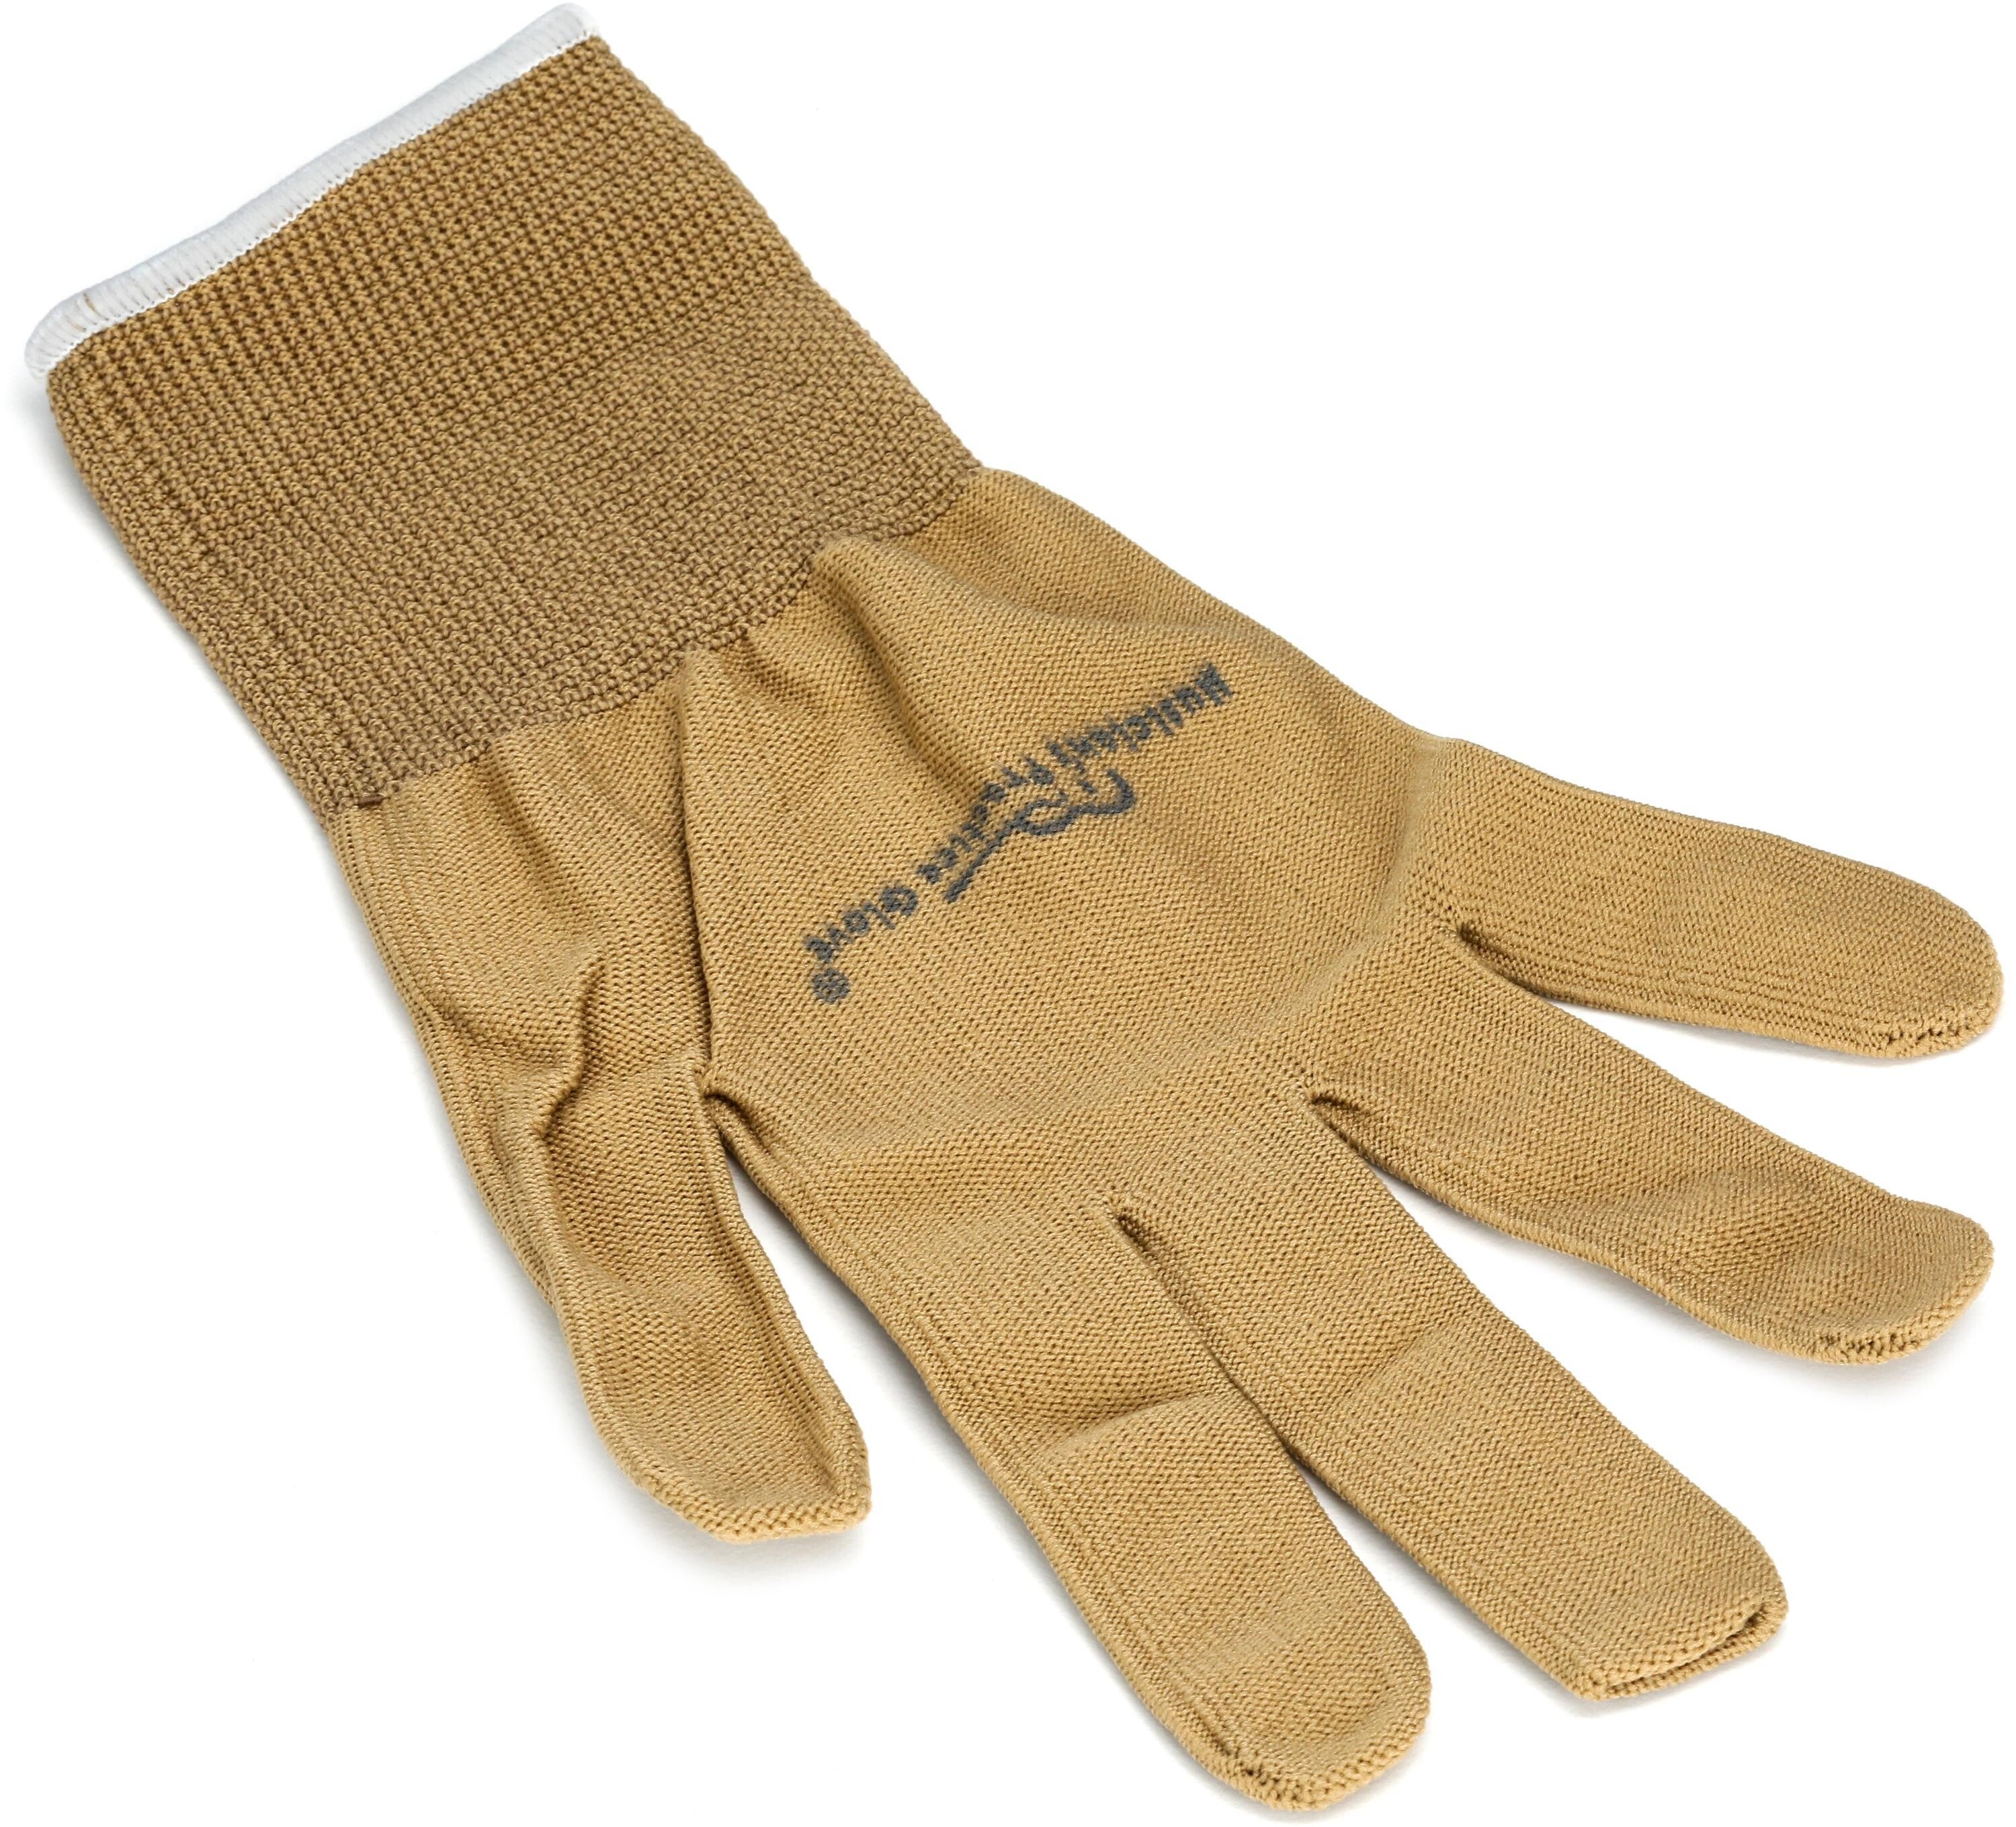 Safe Savings: Cut-resistant gloves worth the $13